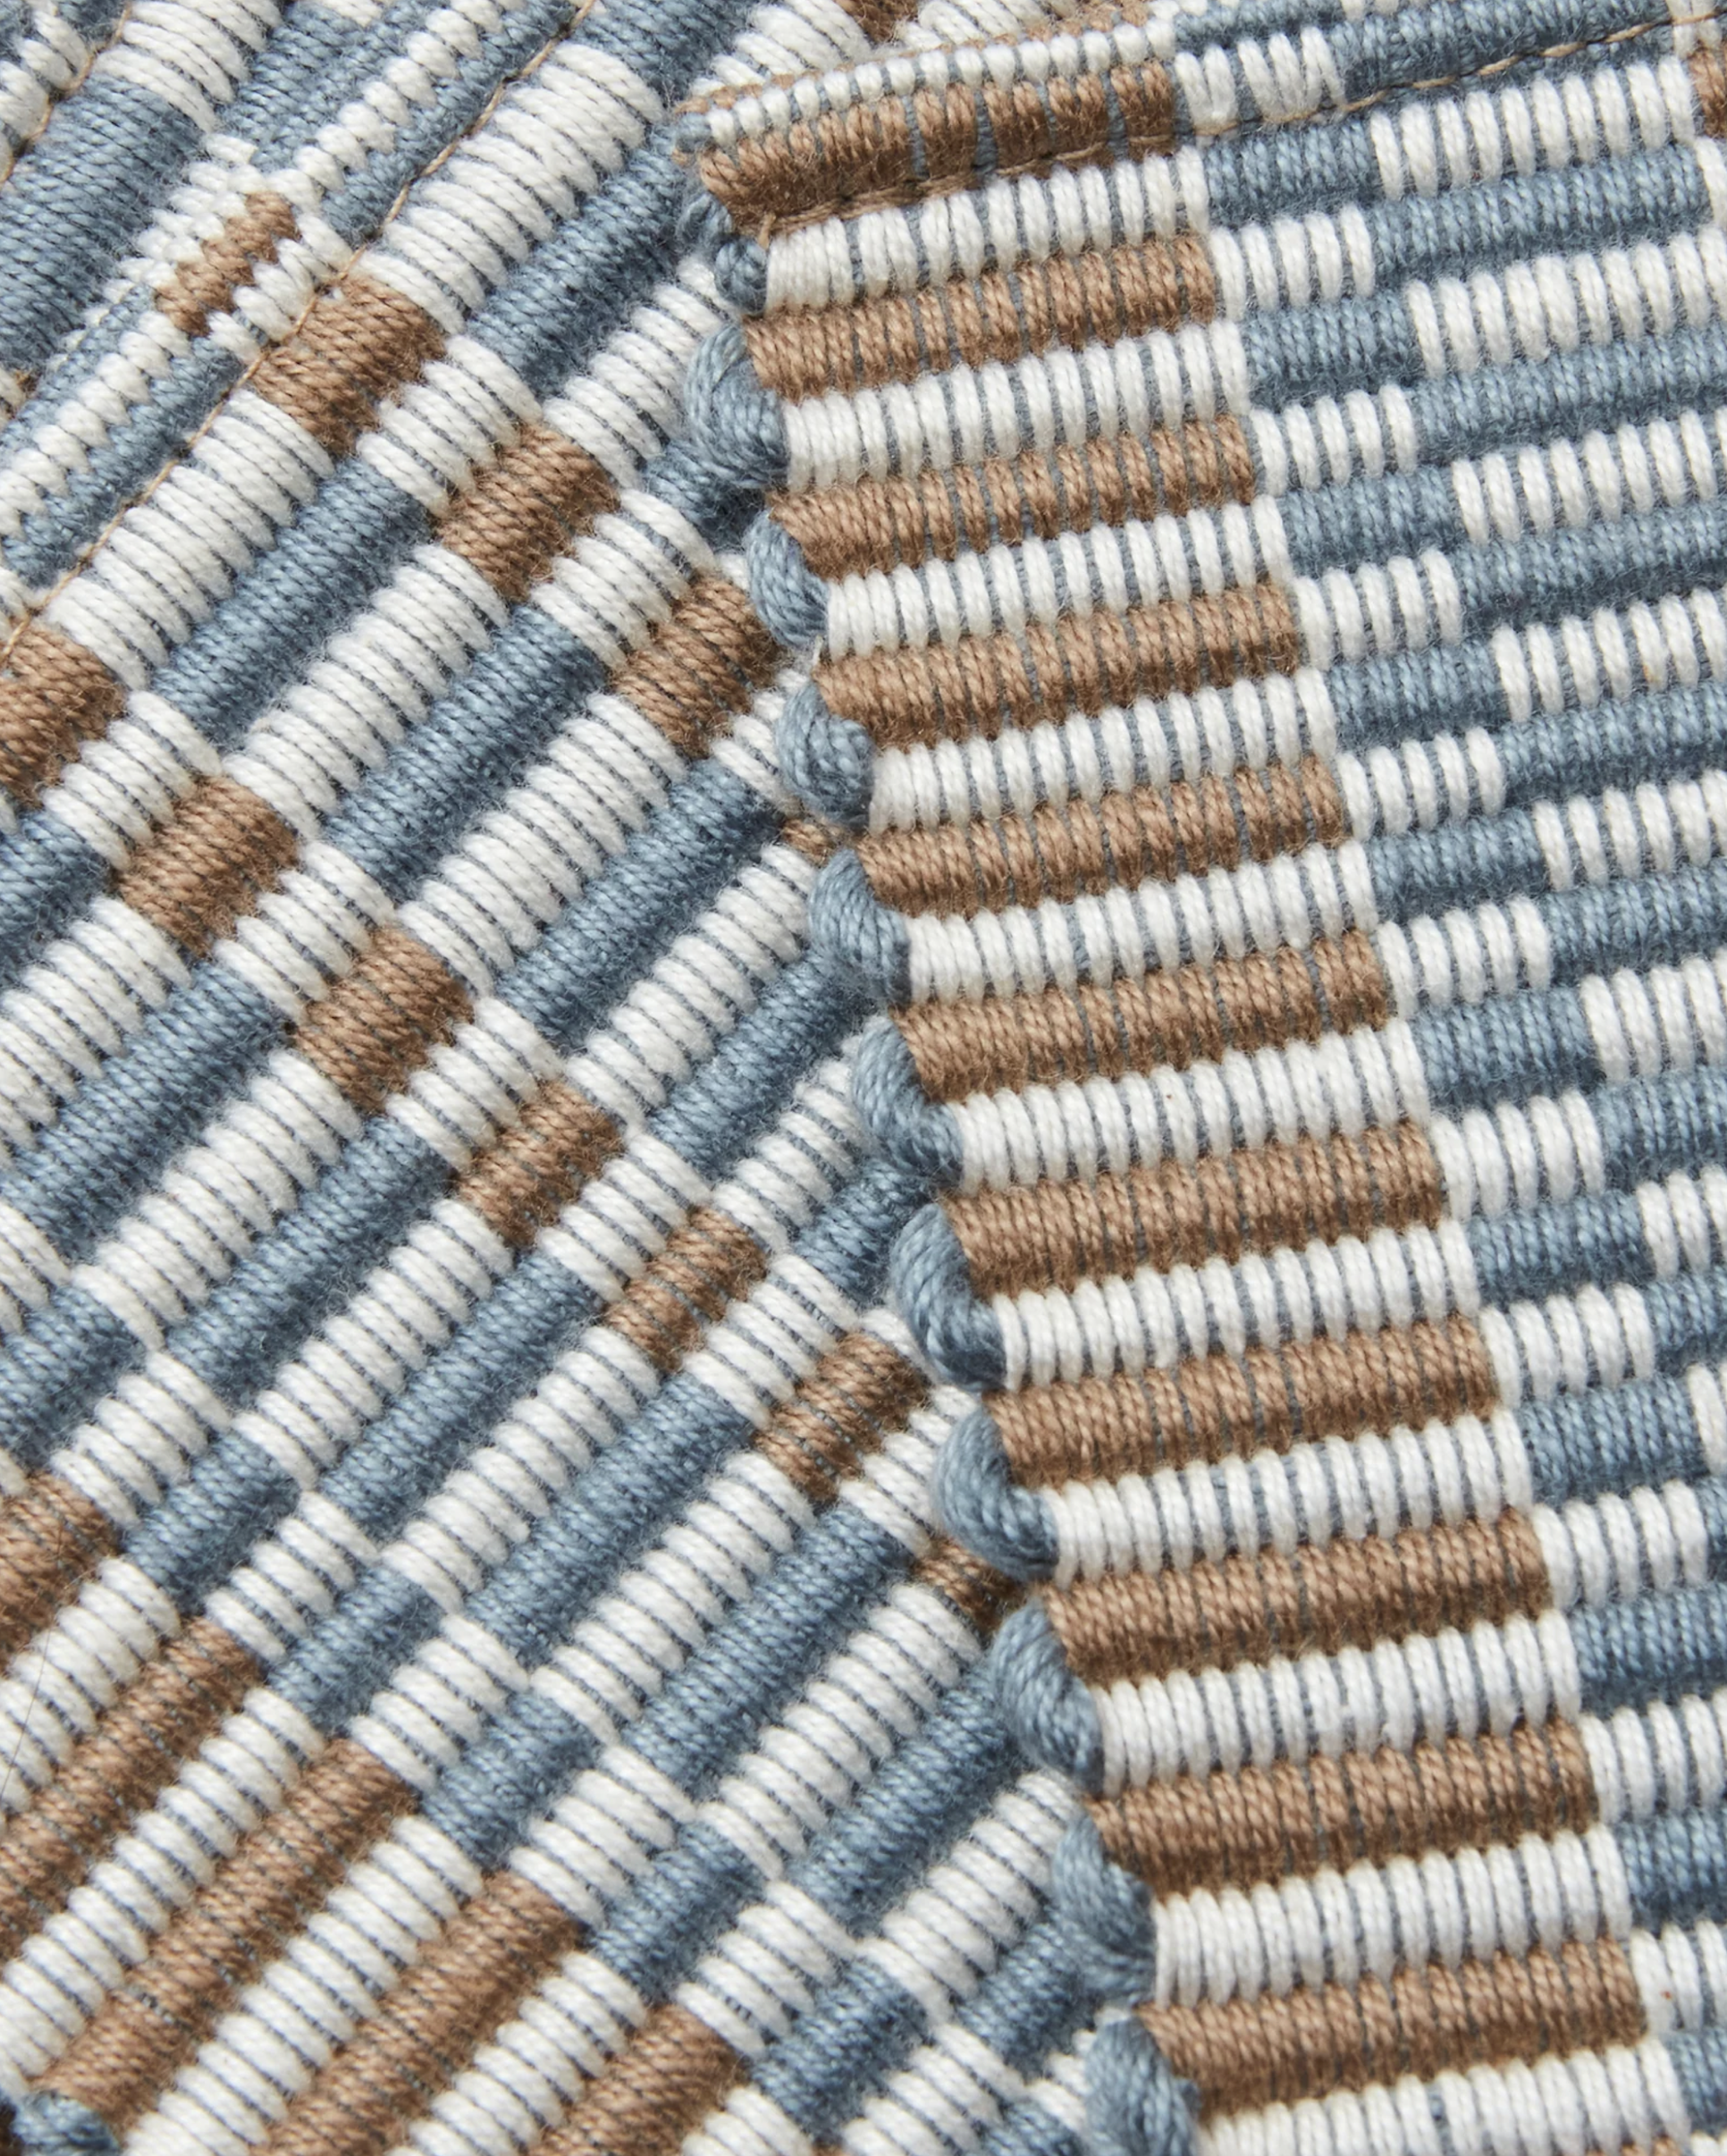 close-up detail of ethically handwoven cotton coaster, texture, light blue, cream, taupe